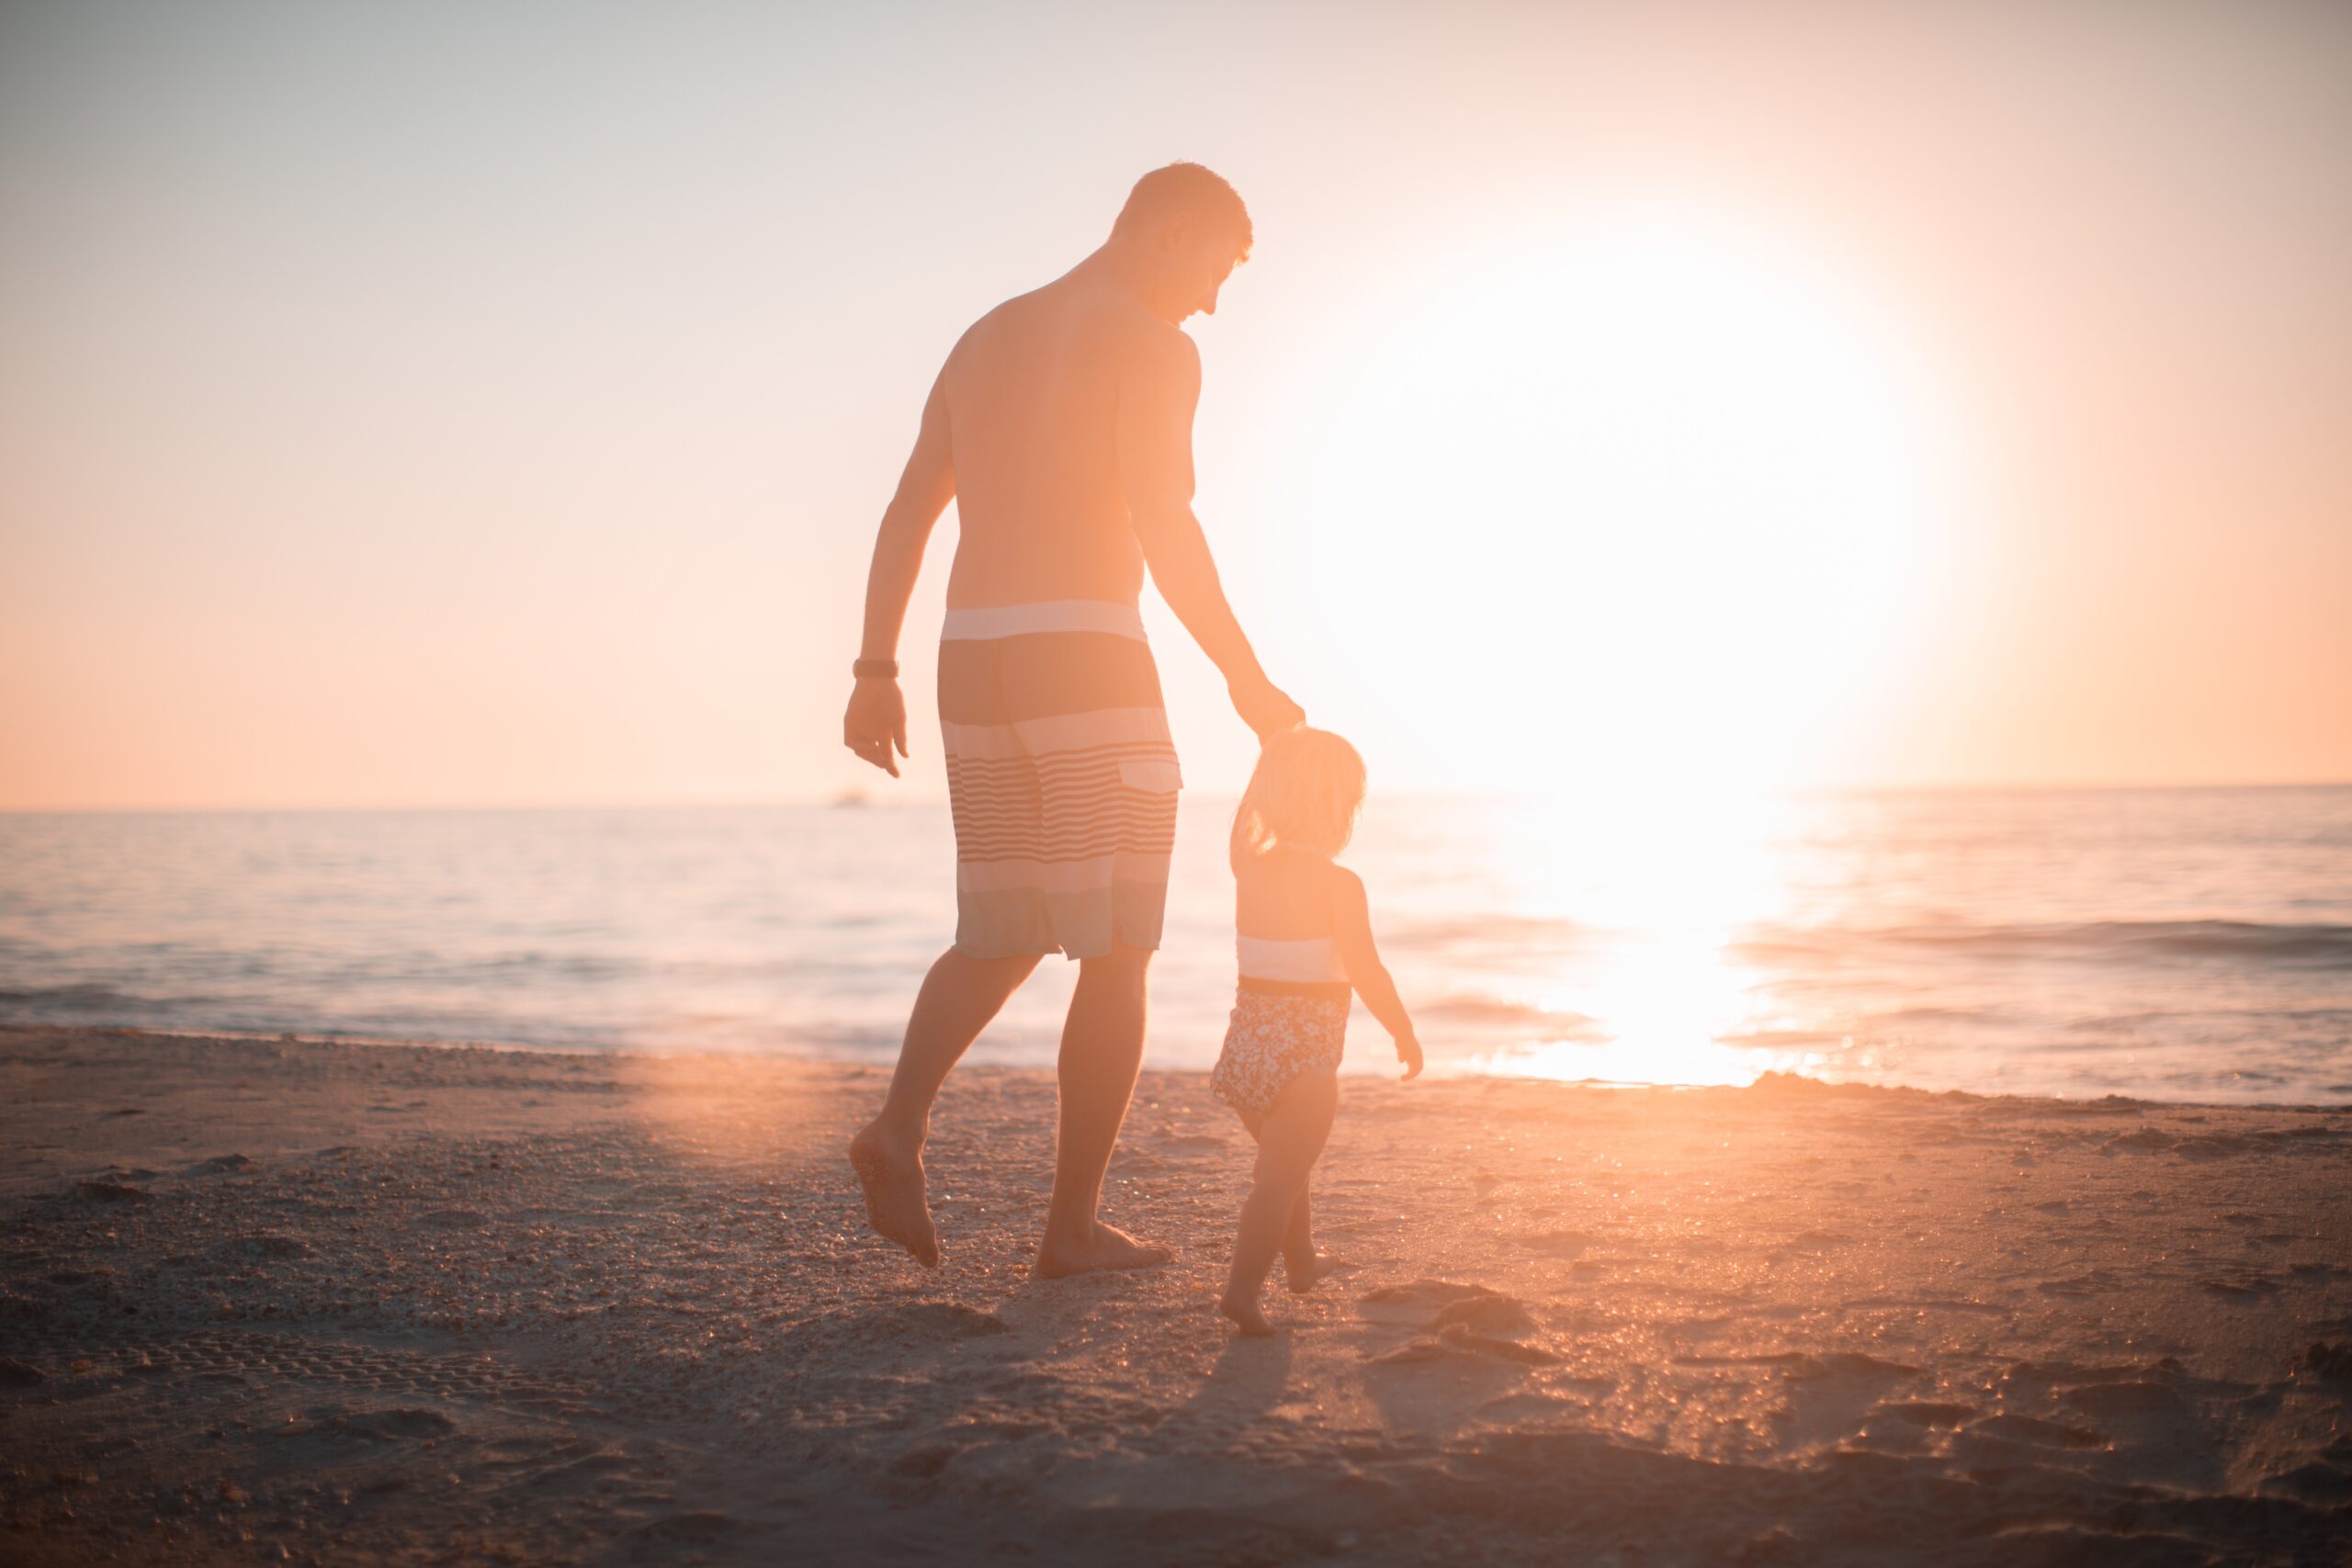 A man and a young child walking hand in hand on a sandy beach during sunset, with the sun casting a warm golden glow over the scene. The ocean waves gently lap at the shore in the background.